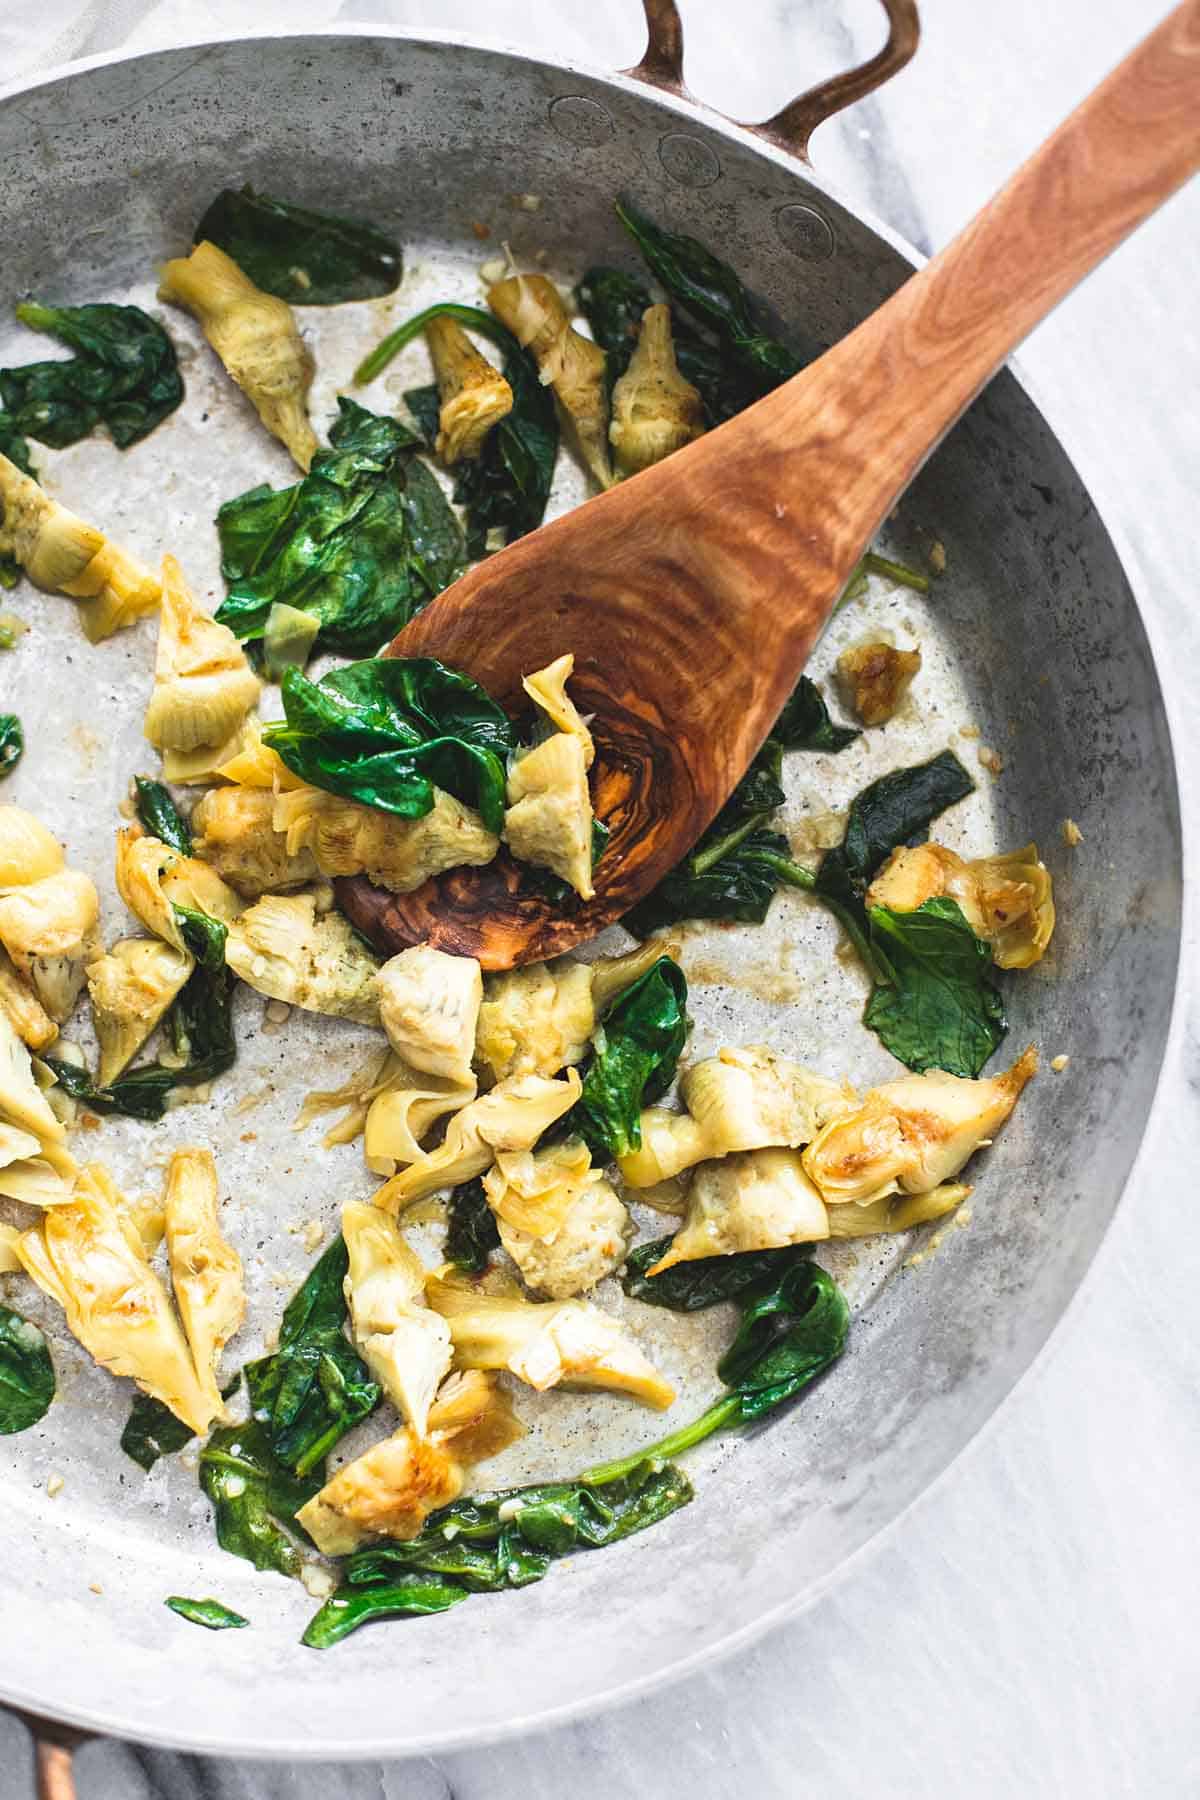 top view of artichoke hearts and spinach with a wooden serving spoon in a skillet.